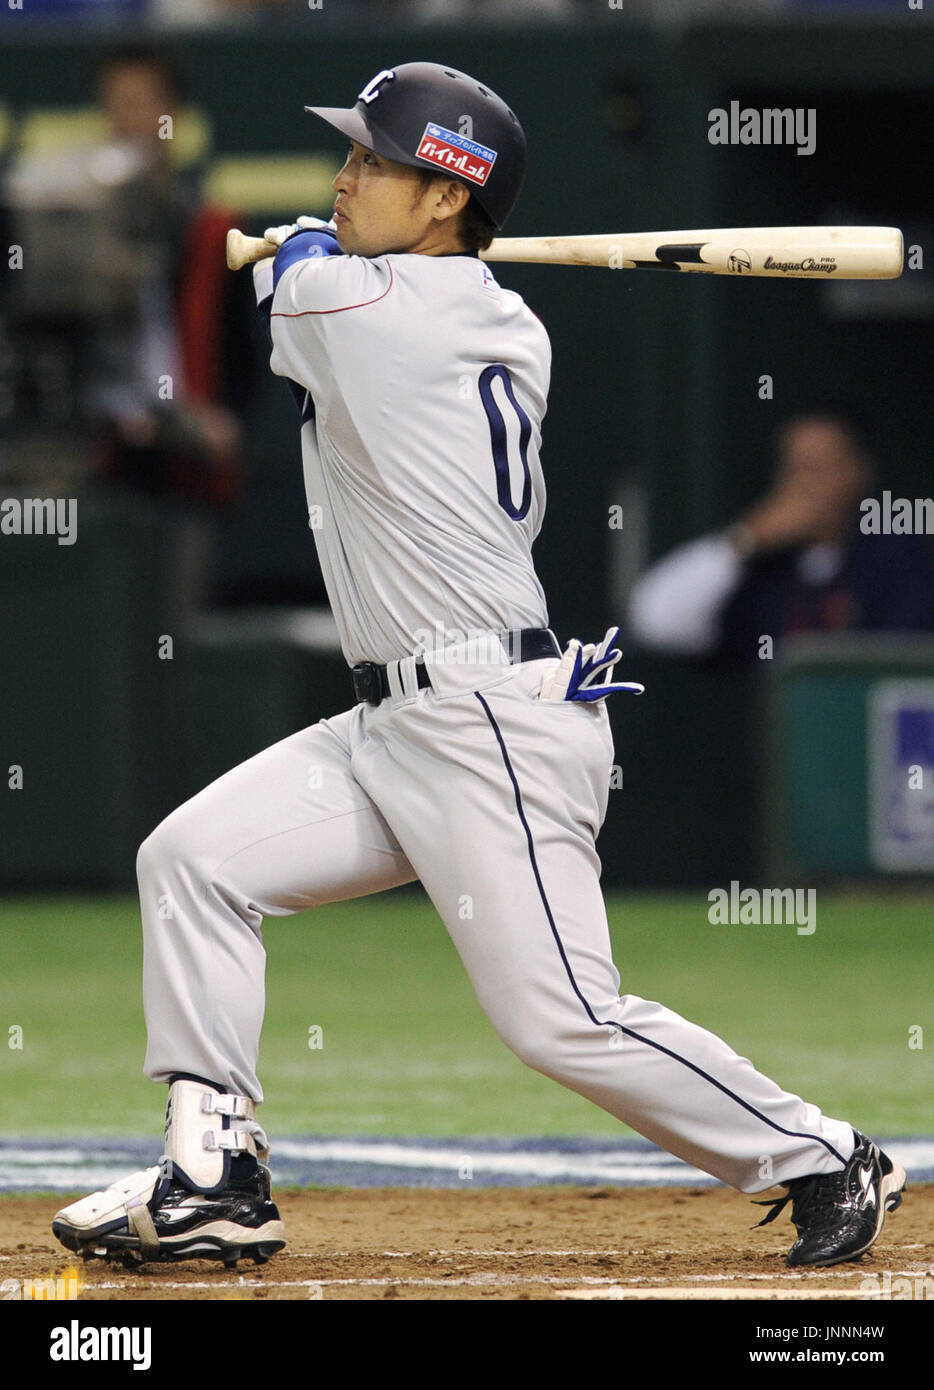 TOKYO, Japan - Outfielder Yutaro Osaki of Japan's Pacific League baseball  club Seibu Lions hits an RBI double in the third inning of an exhibition  game against South Korea at Tokyo Dome